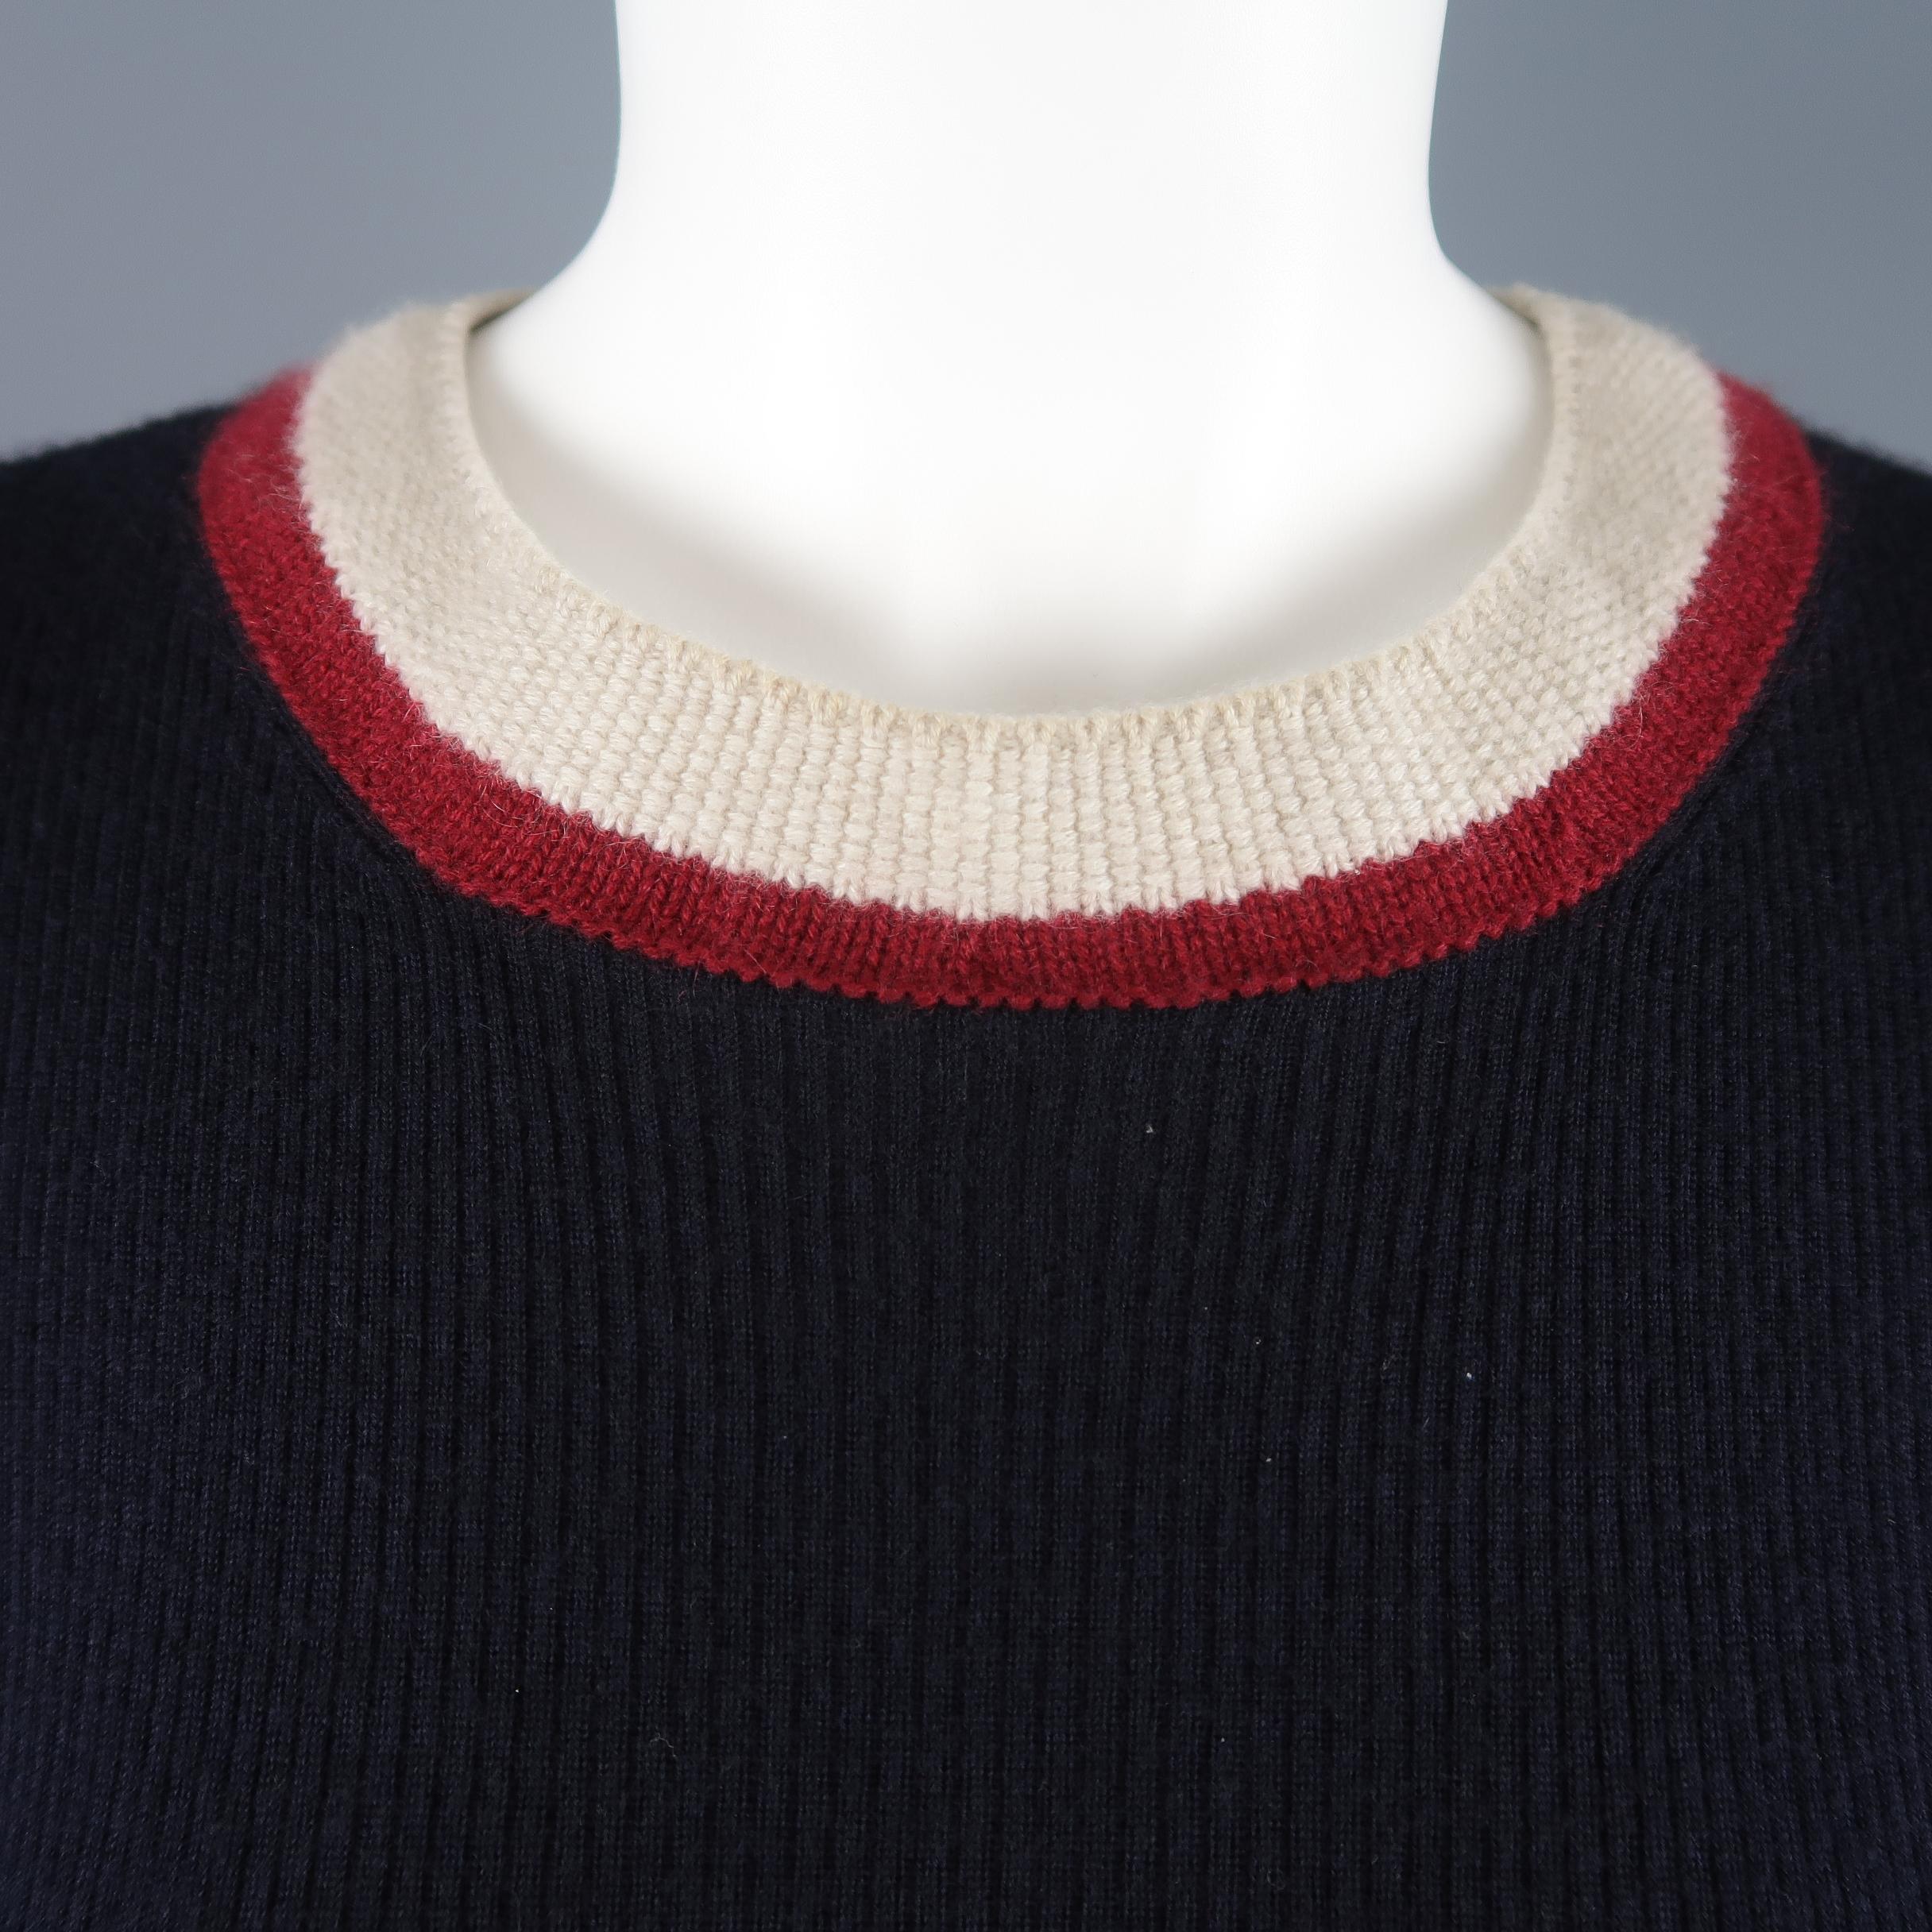 Chanel pullover sweater comes in navy blue ribbed knit with a round neckline, black enamel logo plaque, and khaki and burgundy striped trim. Made in Italy.
 
Excellent Pre-Owned Condition.
Marked: FR 40
 
Measurements:
 
Shoulder: 14 in.
Bust: 30